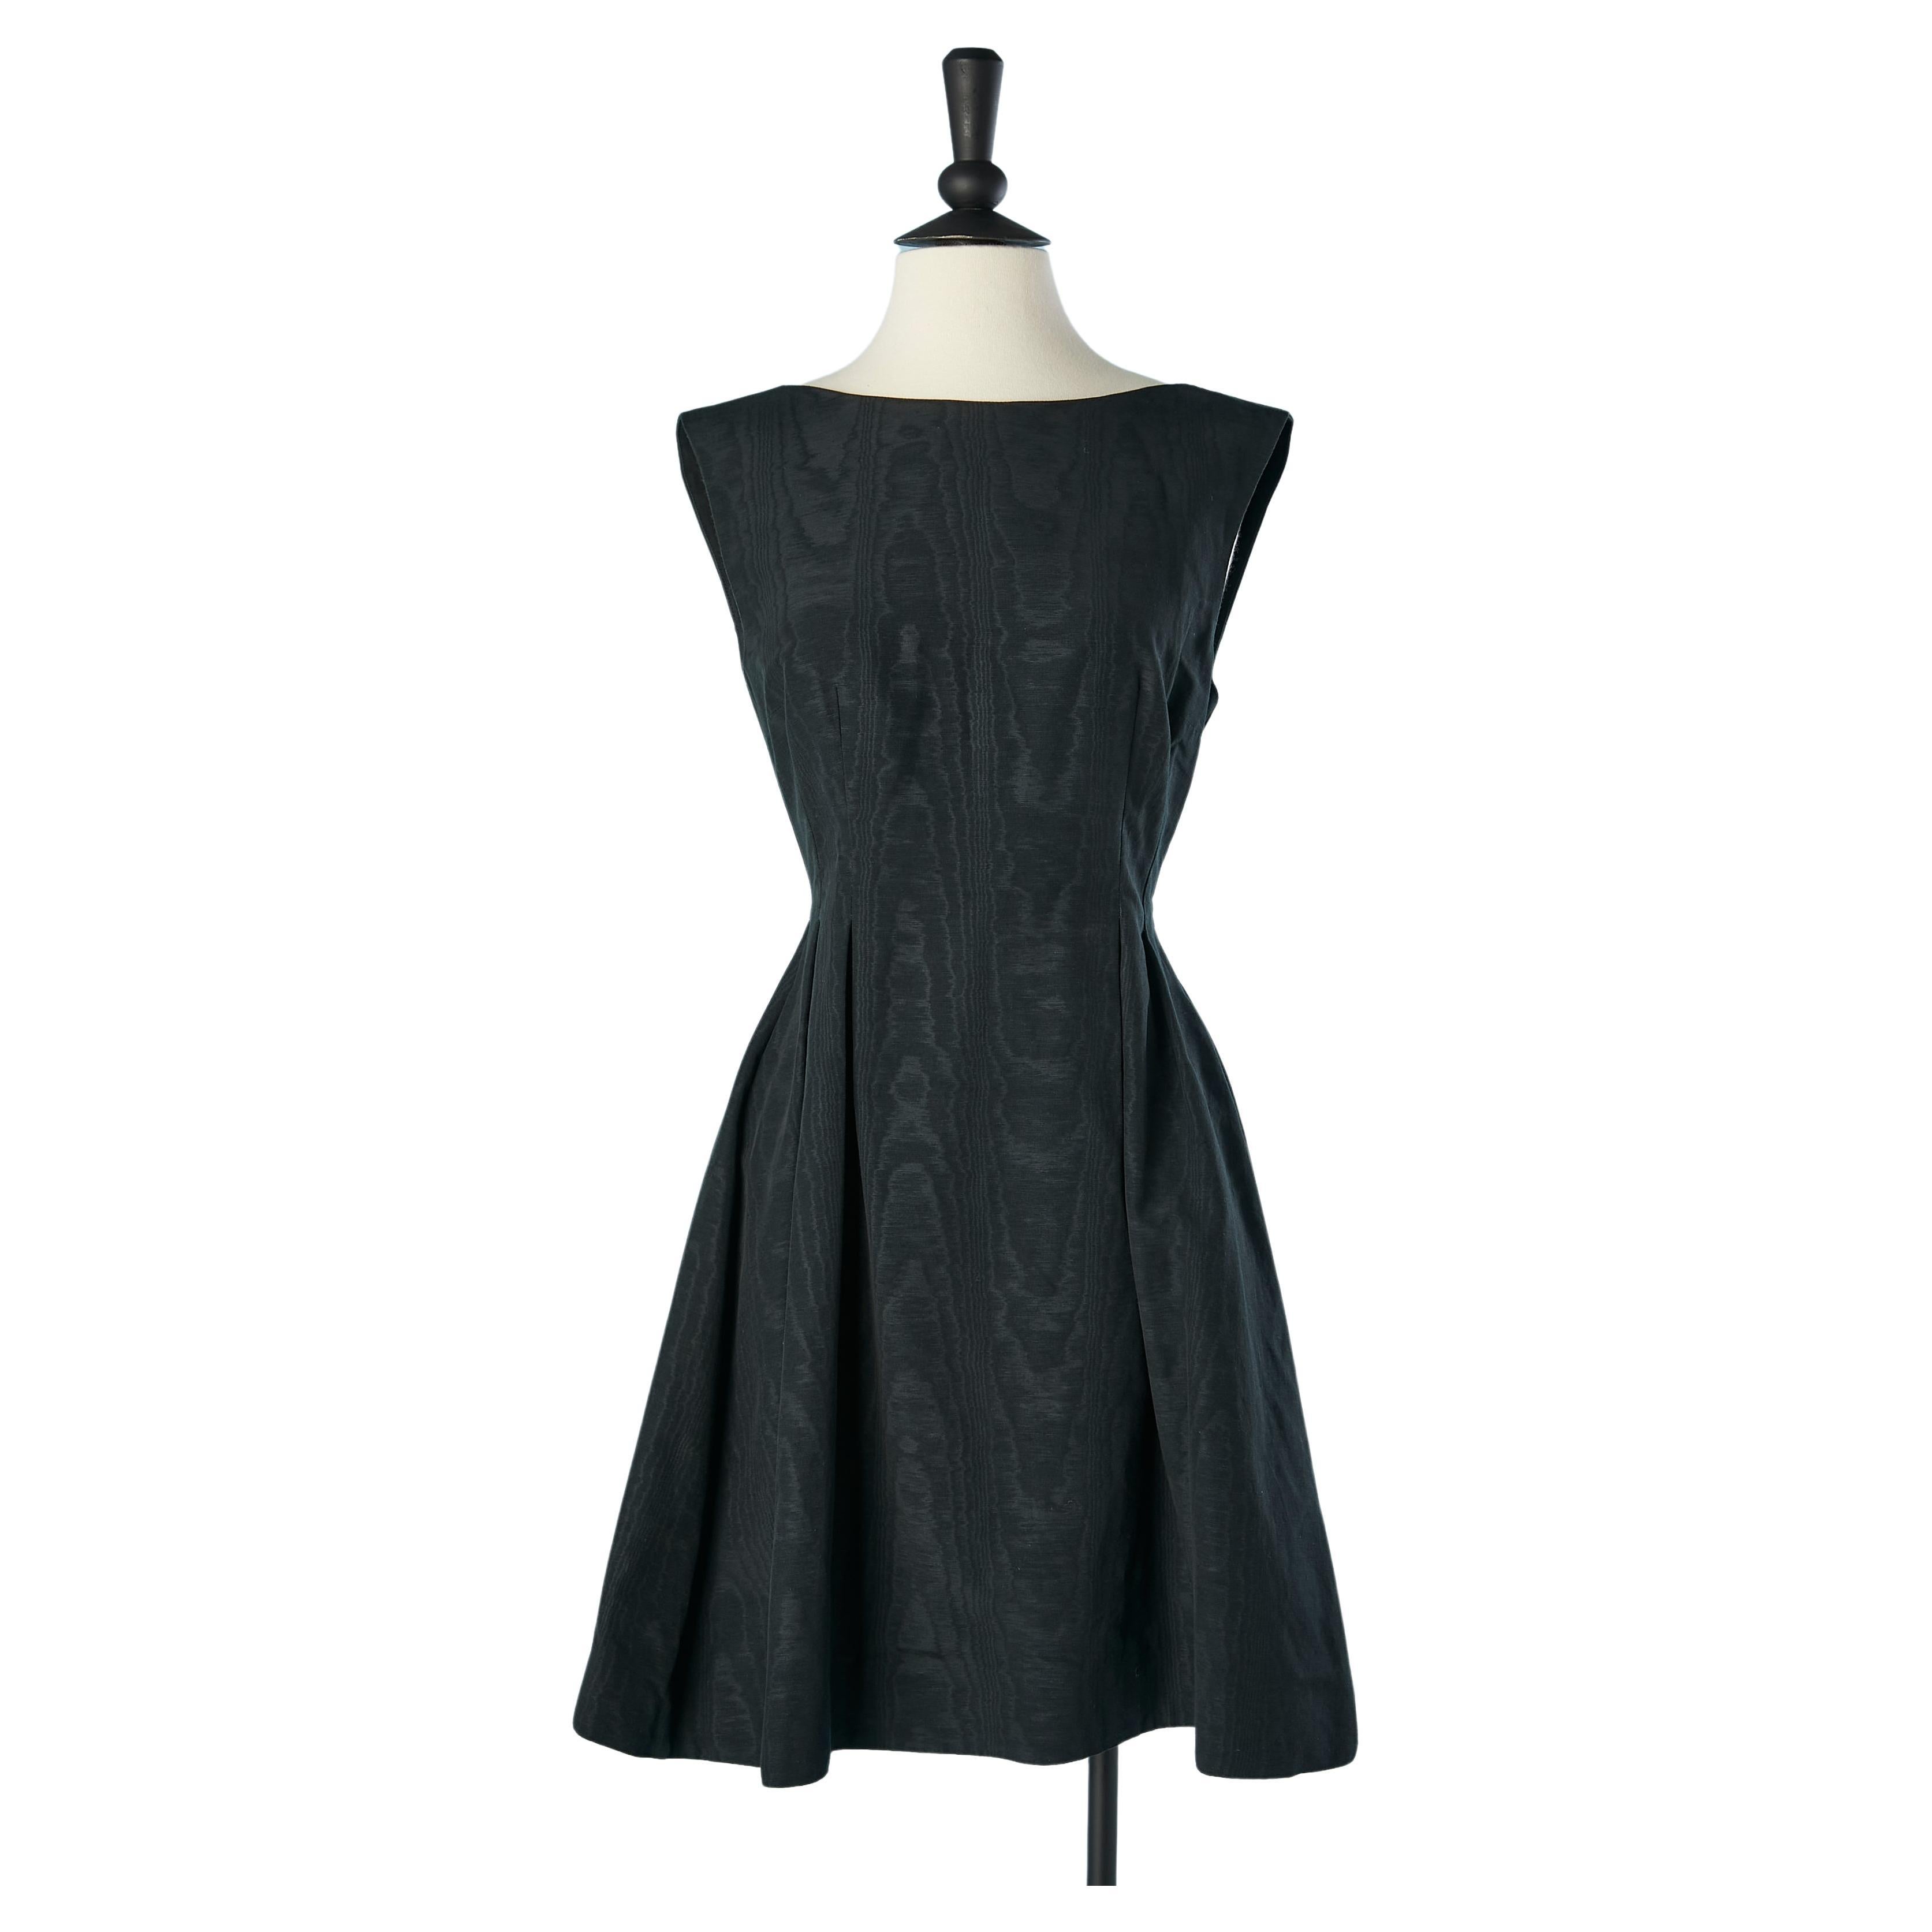 Black moiré cocktail dress  with pink zip in the back McQ Alexander McQueen  For Sale